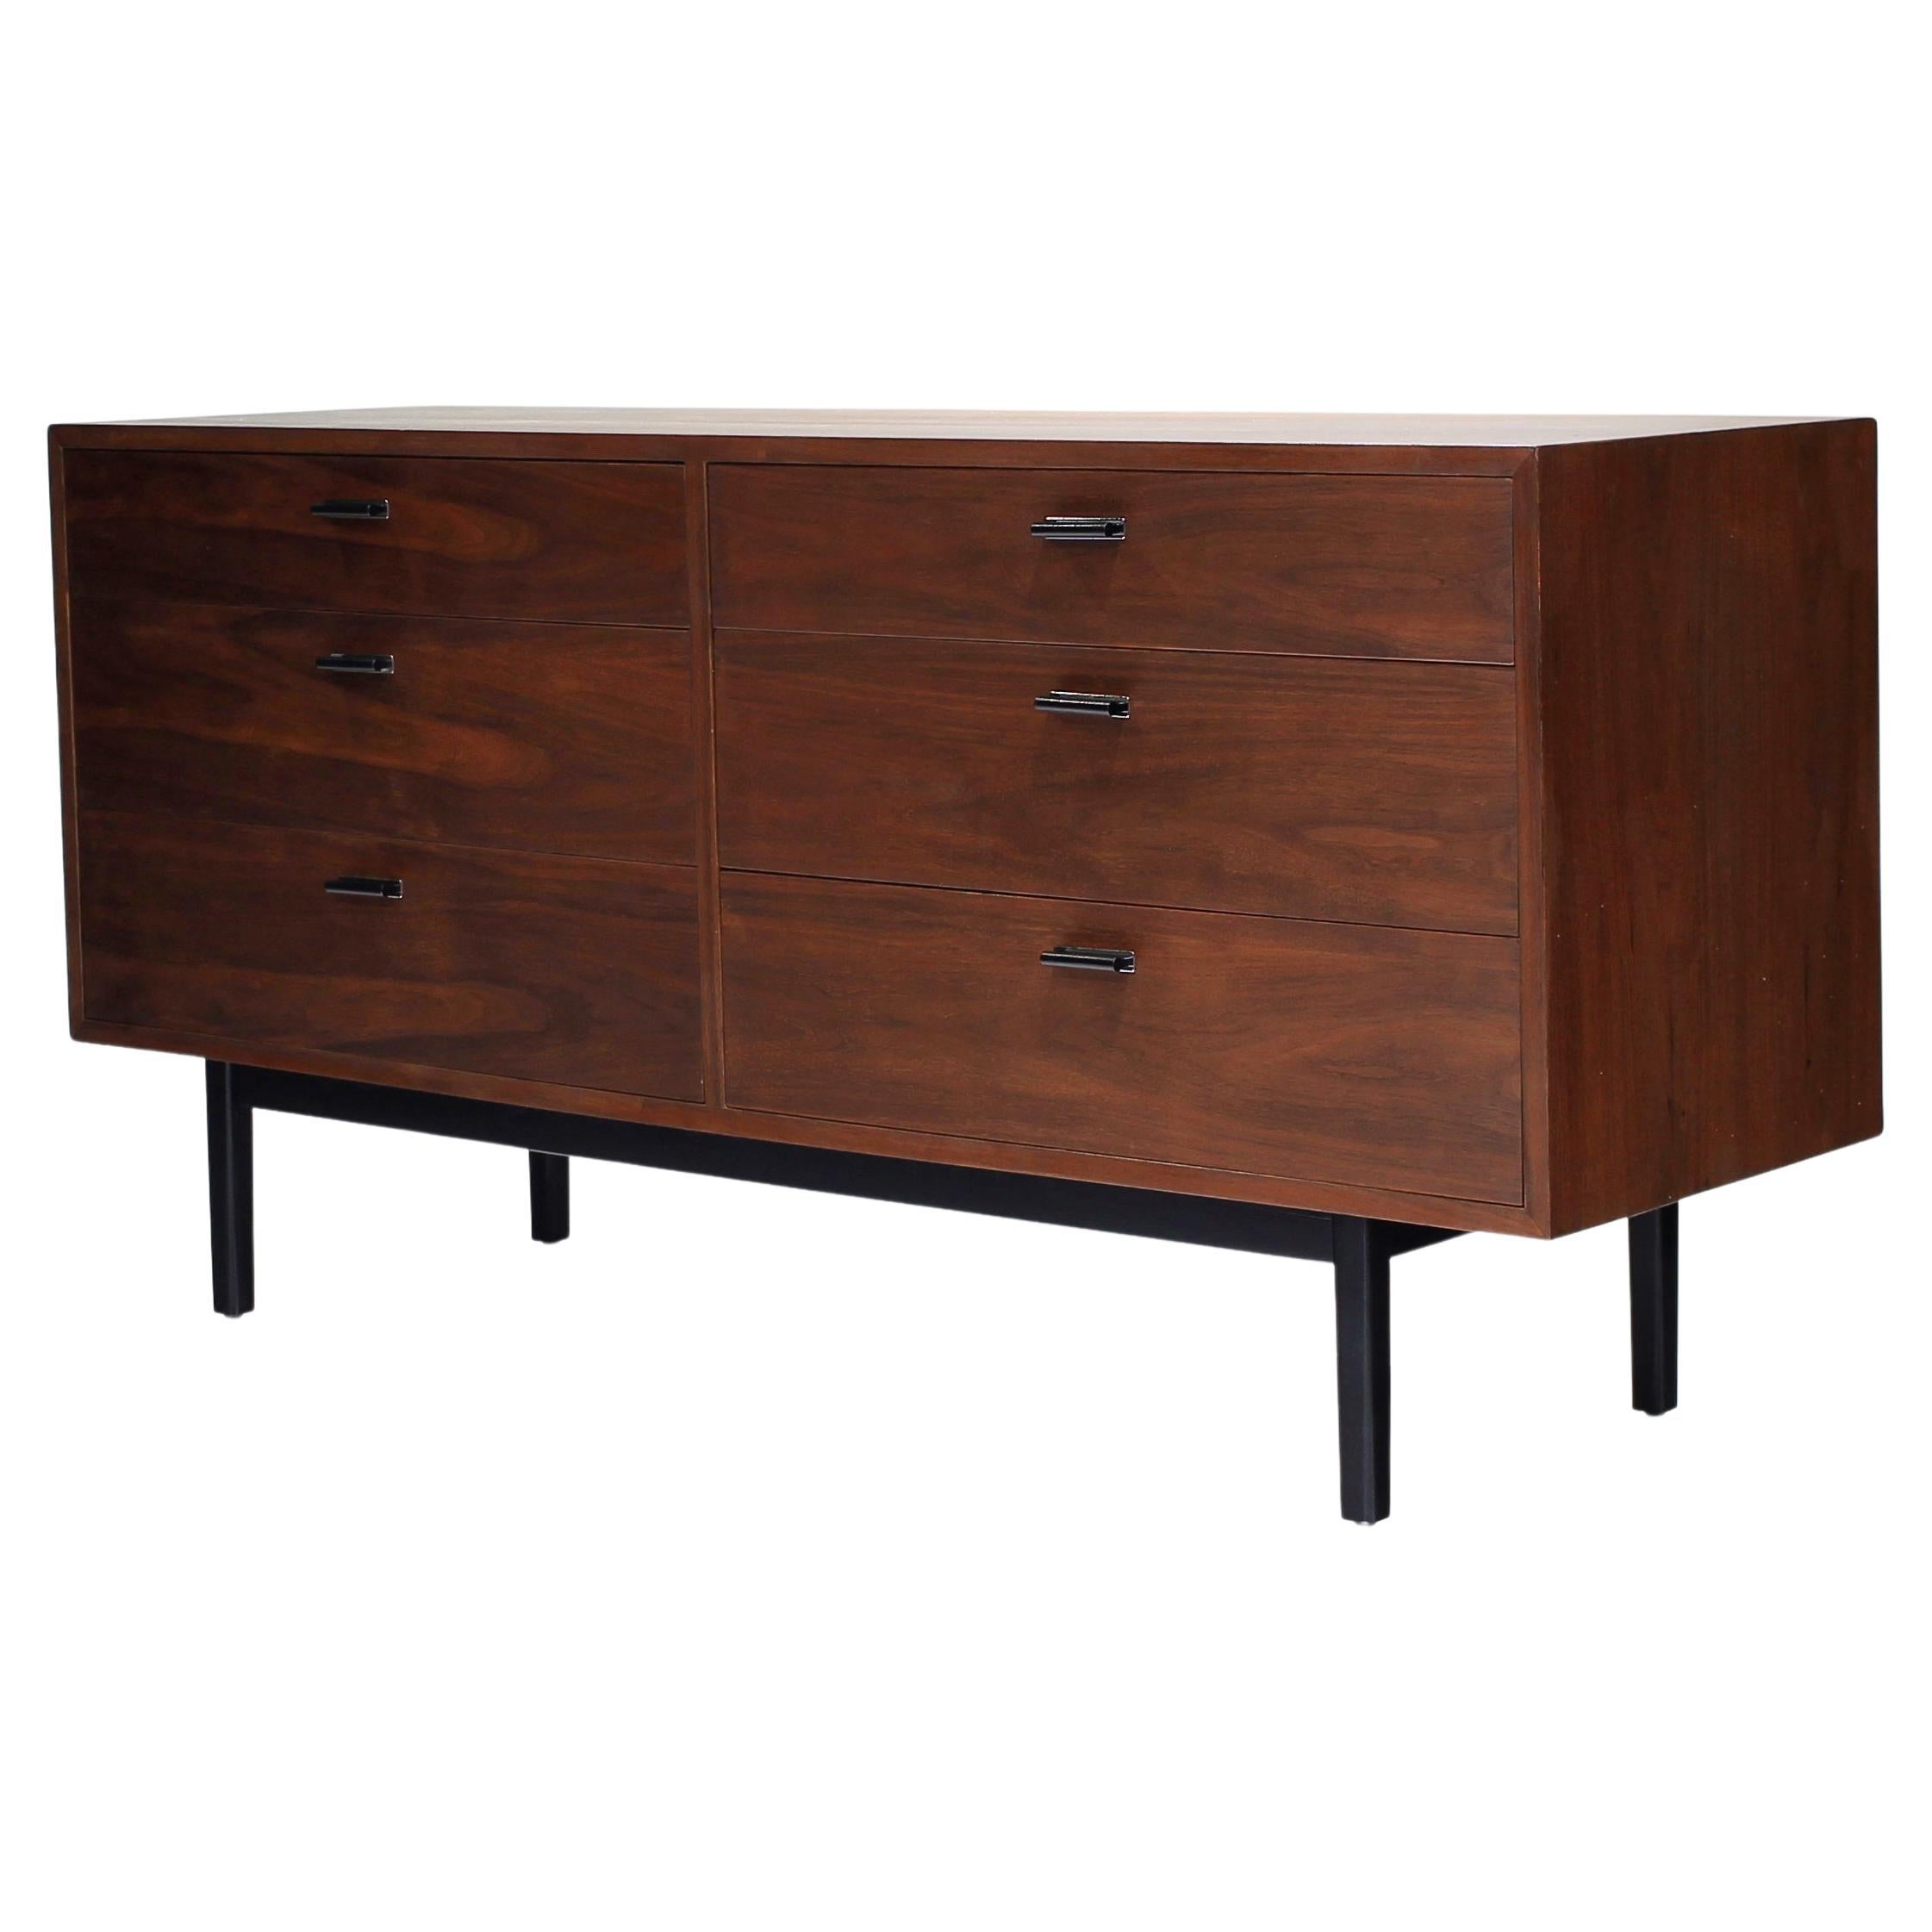 Mid-Century Modern Walnut Dresser with 6 Drawers by Jack Cartwright For Sale